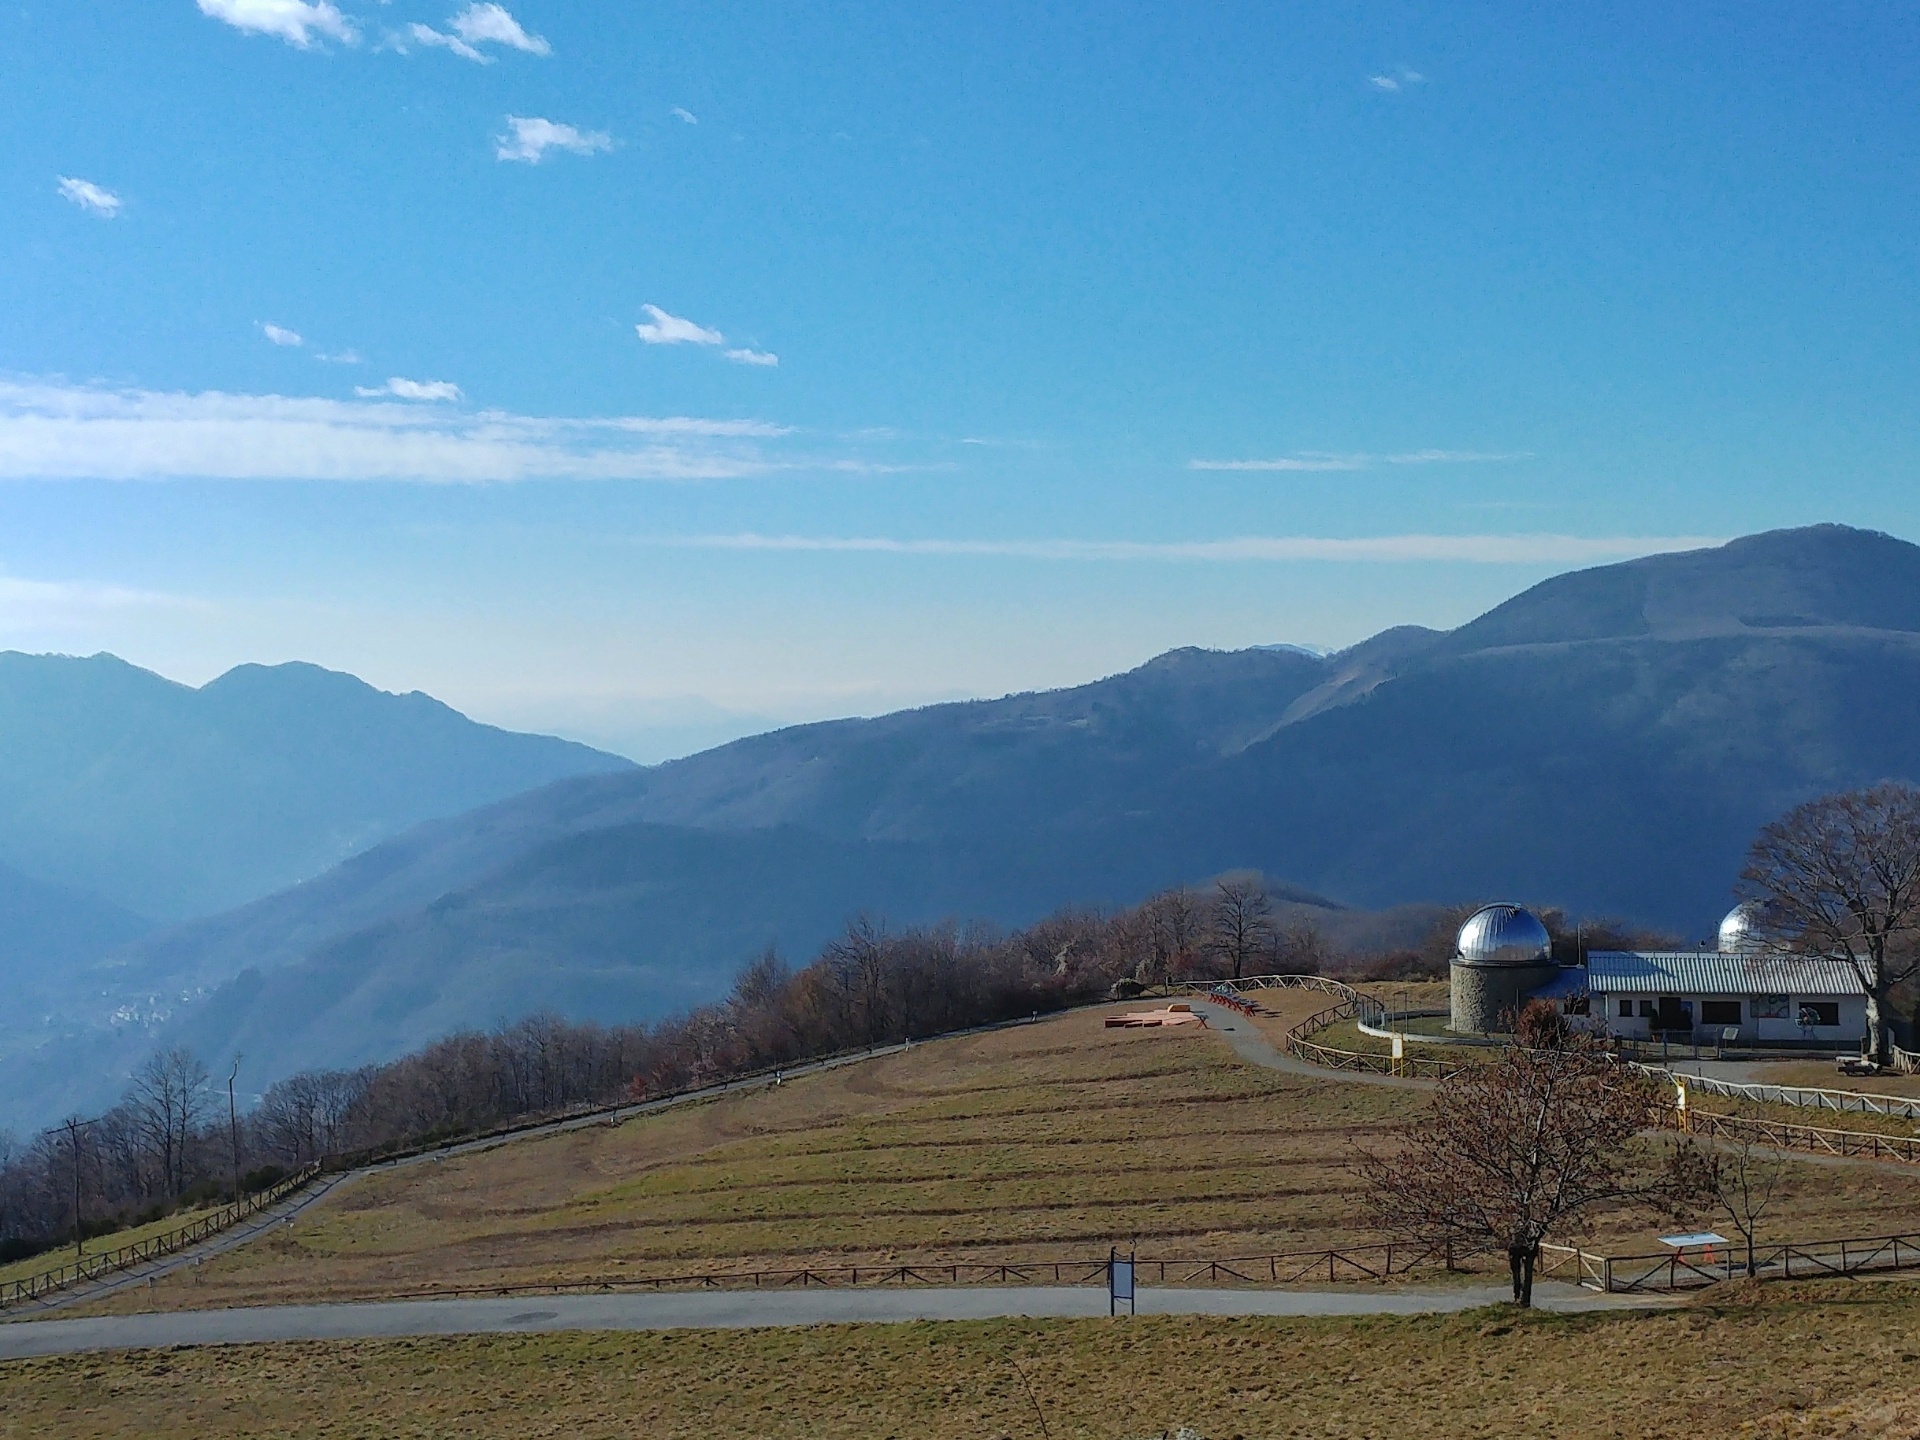 The Pistoia Mountains Astronomical Observatory and the Stars Park